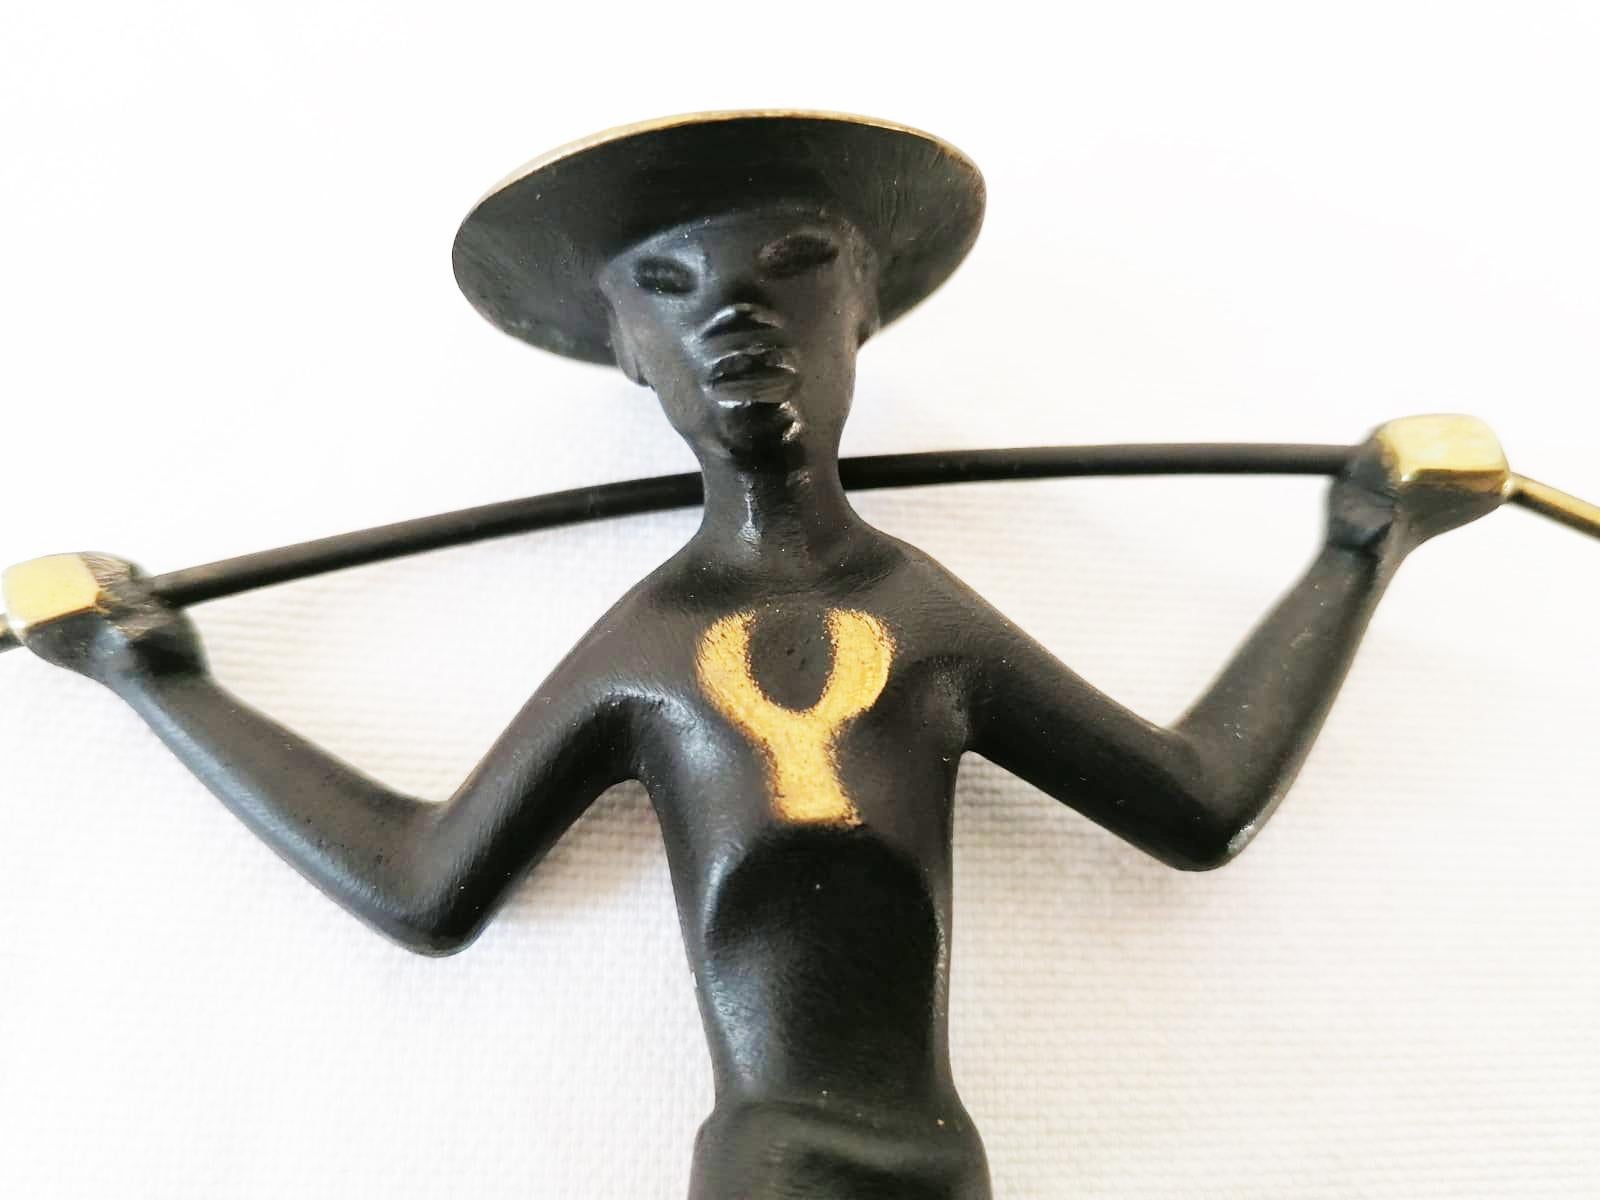 Brass figurine blackened Chinese water carrier with a salt pepper Horn Shaker. Designed in the 1950s by Richard Rohac in Austria.
Excellent original condition.